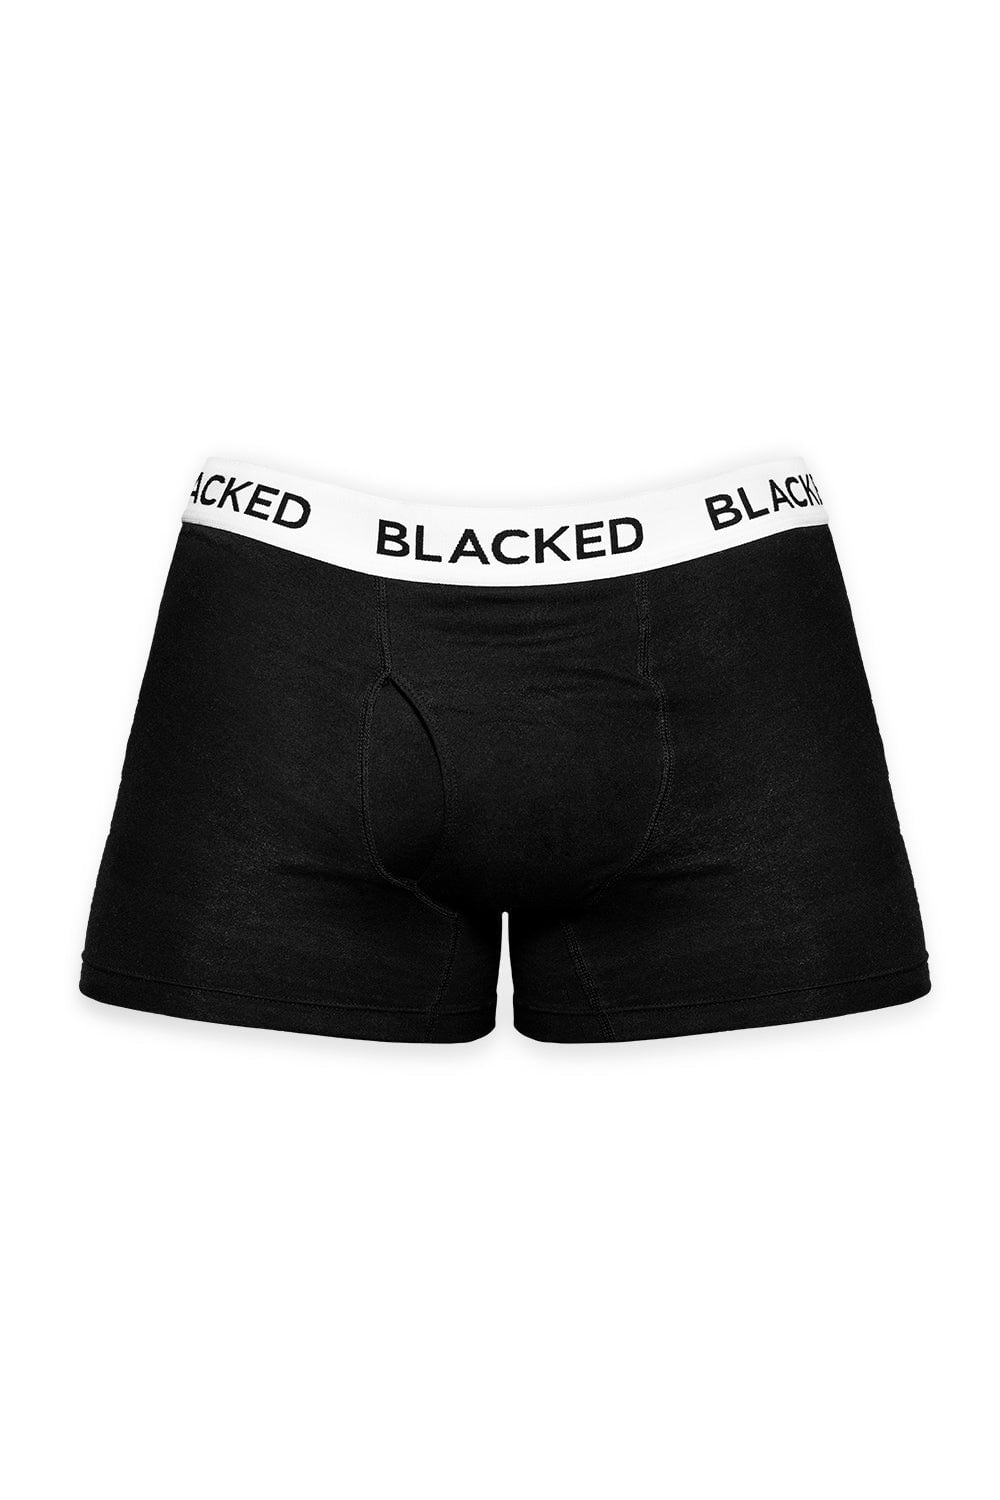 Shop Blacked Underwear with great discounts and prices online